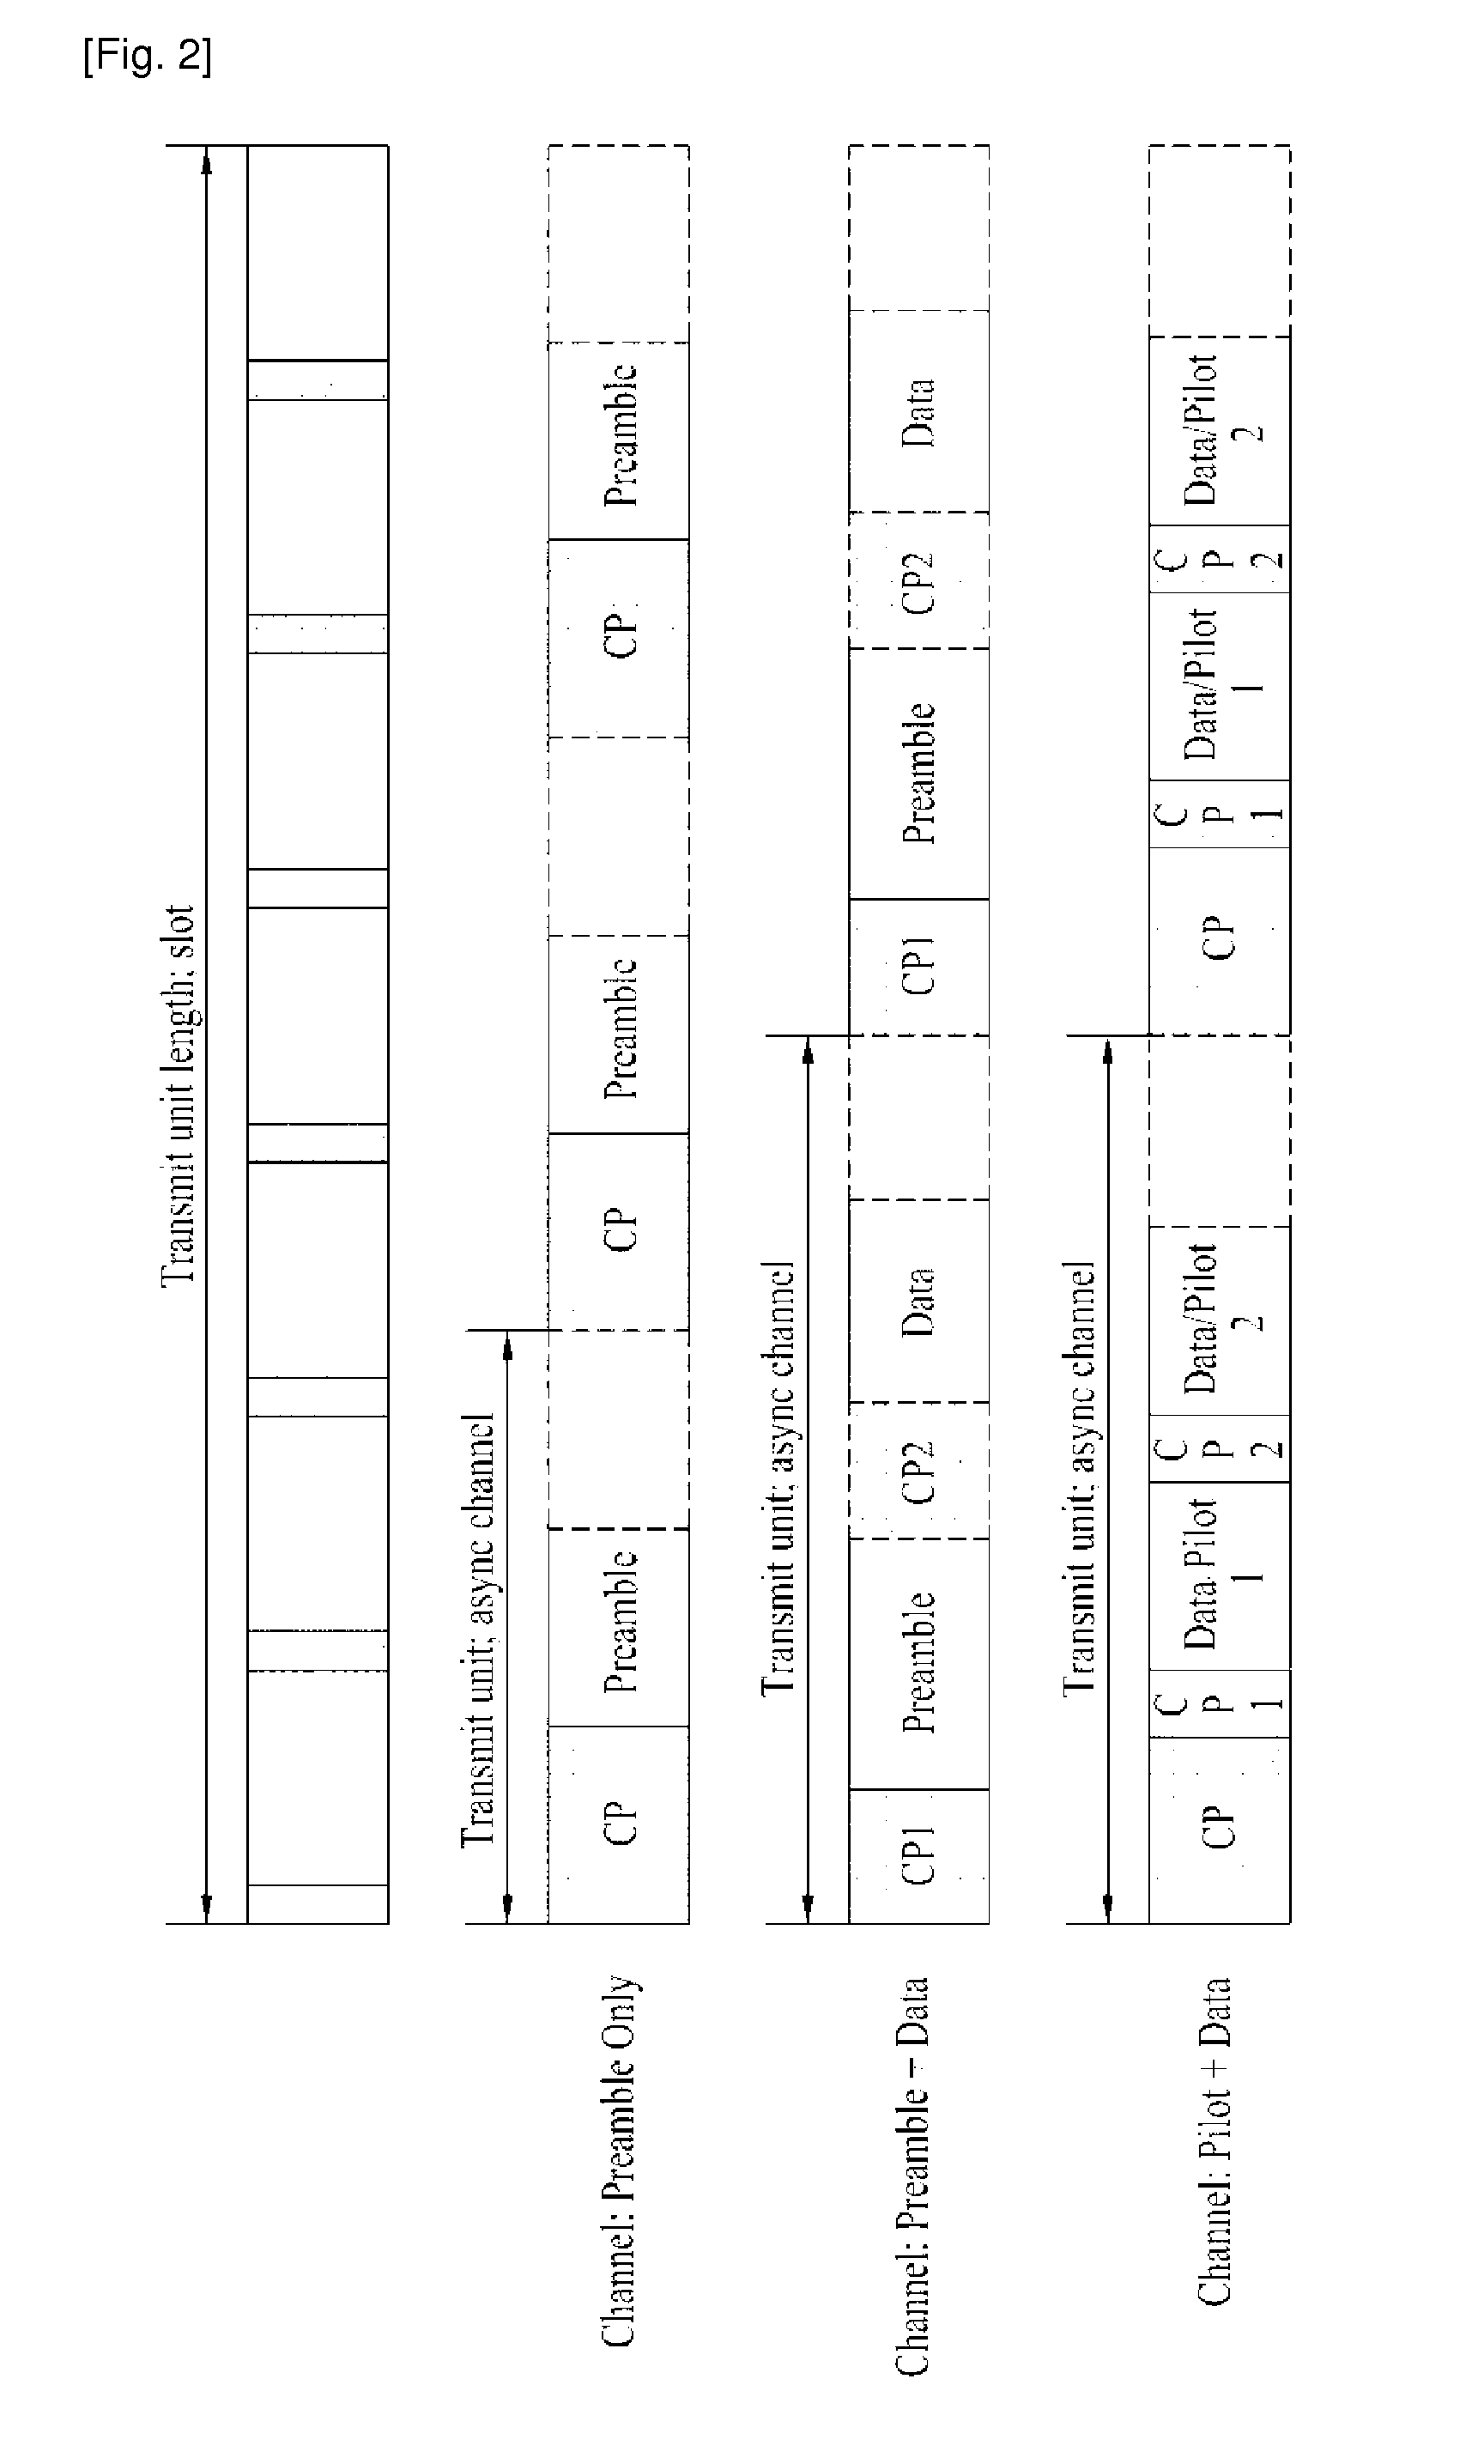 Method of Transmitting Signal in a Wireless System